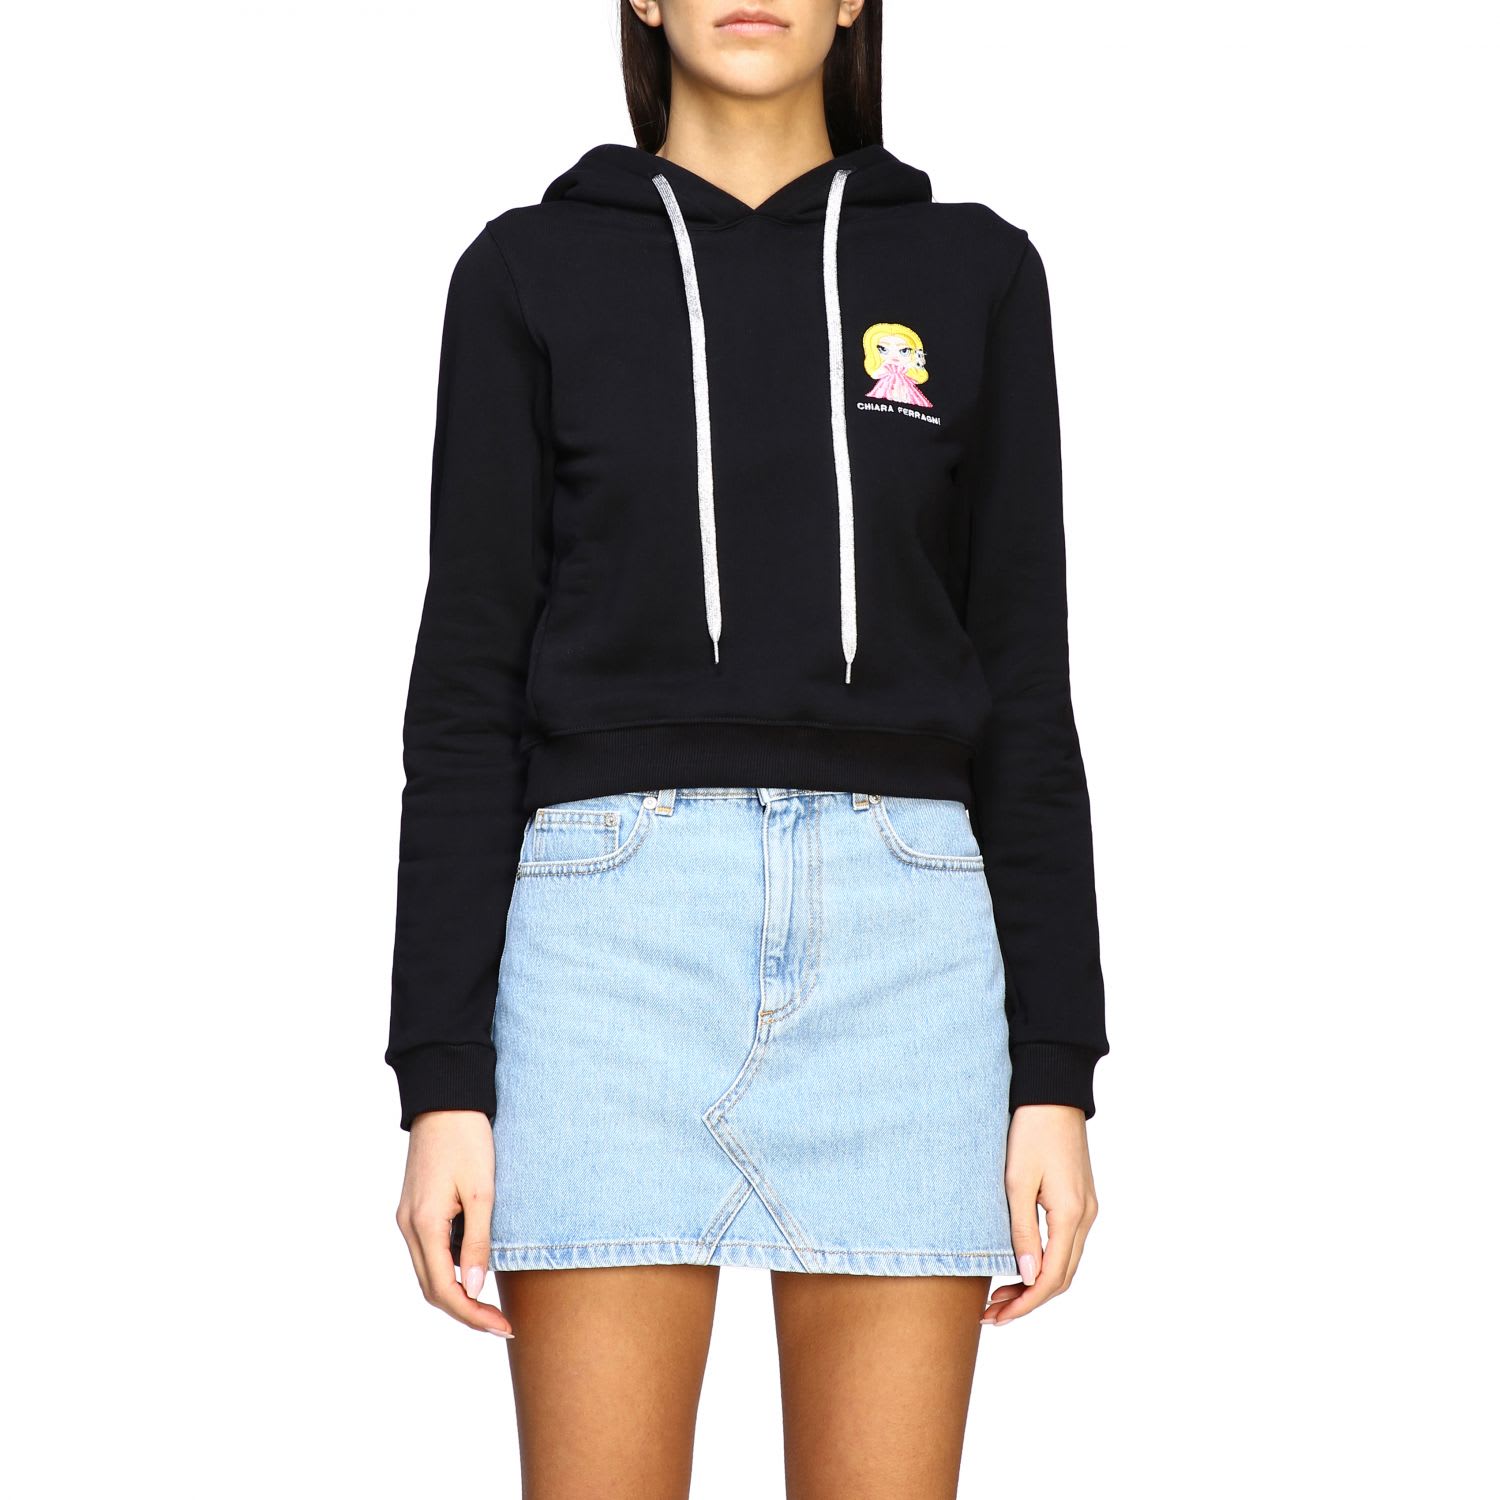 Chiara Ferragni Cropped Sweatshirt With Hood And Mascot Embroidery In Black